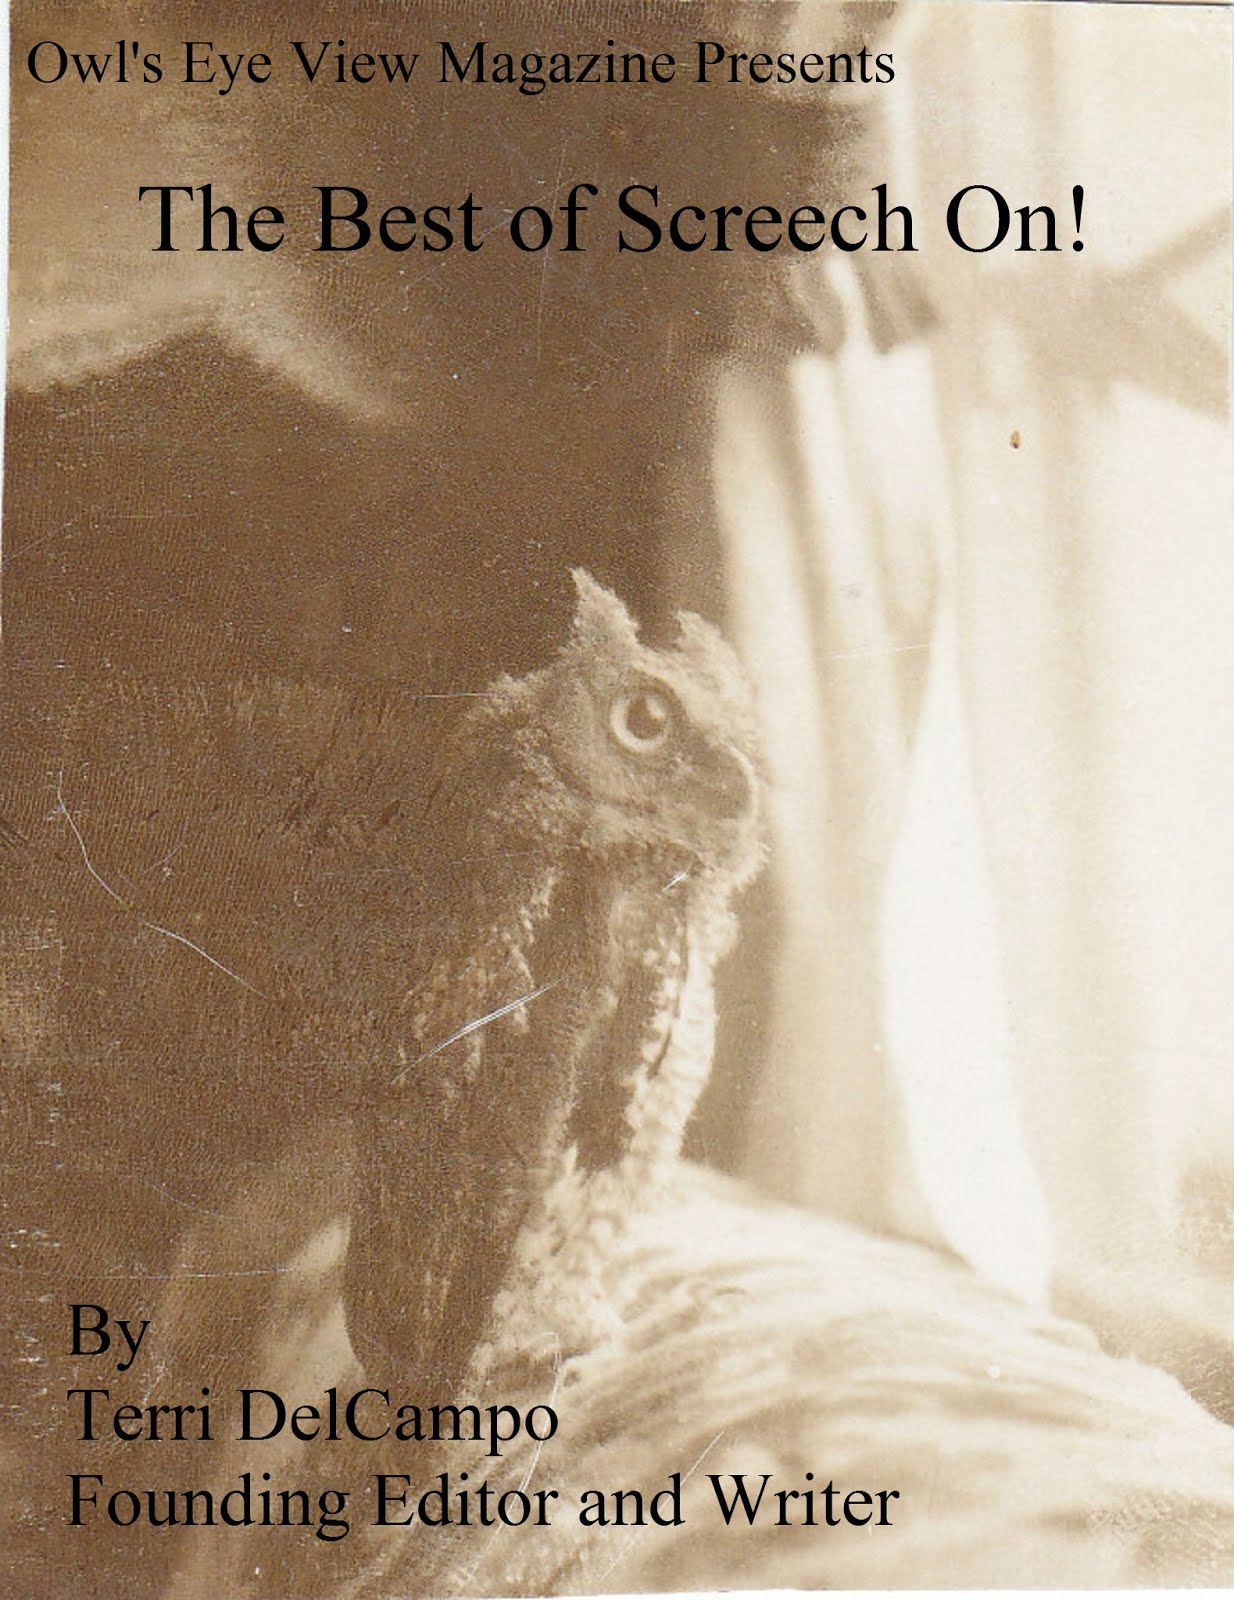 OEV MAGAZINE PRESENTS THE BEST OF SCREECH ON!